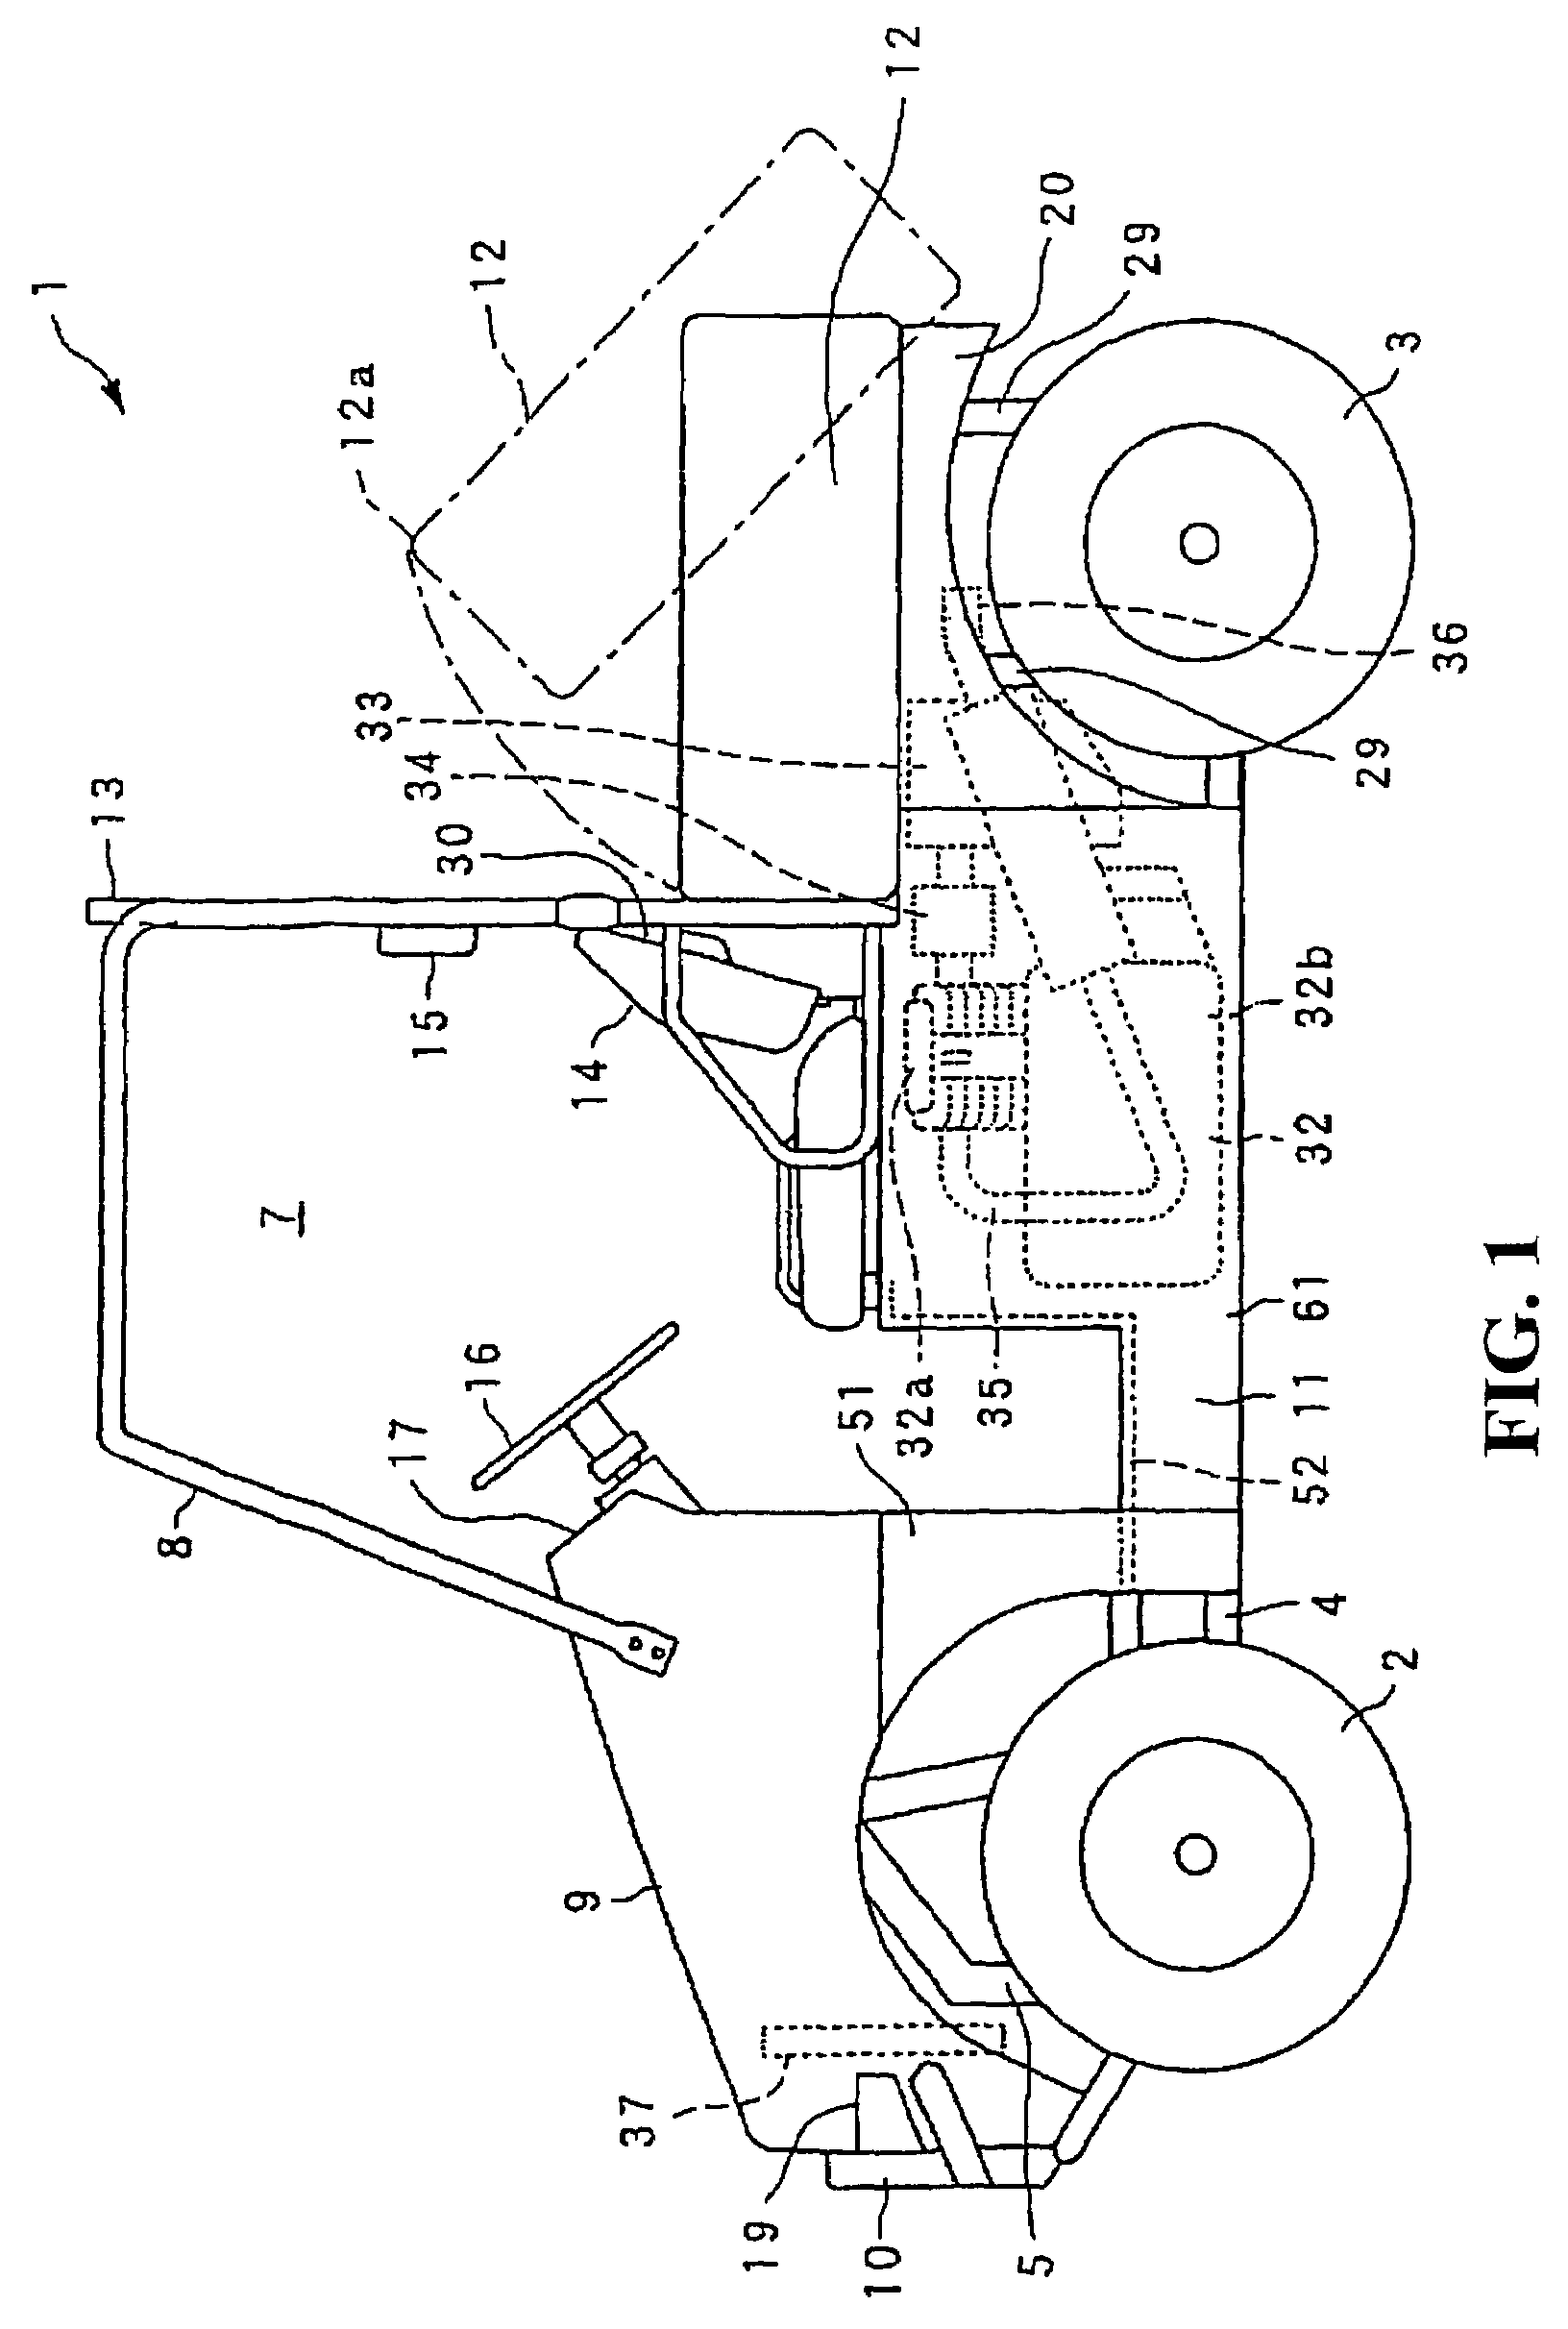 Body cover structure for seat type vehicle